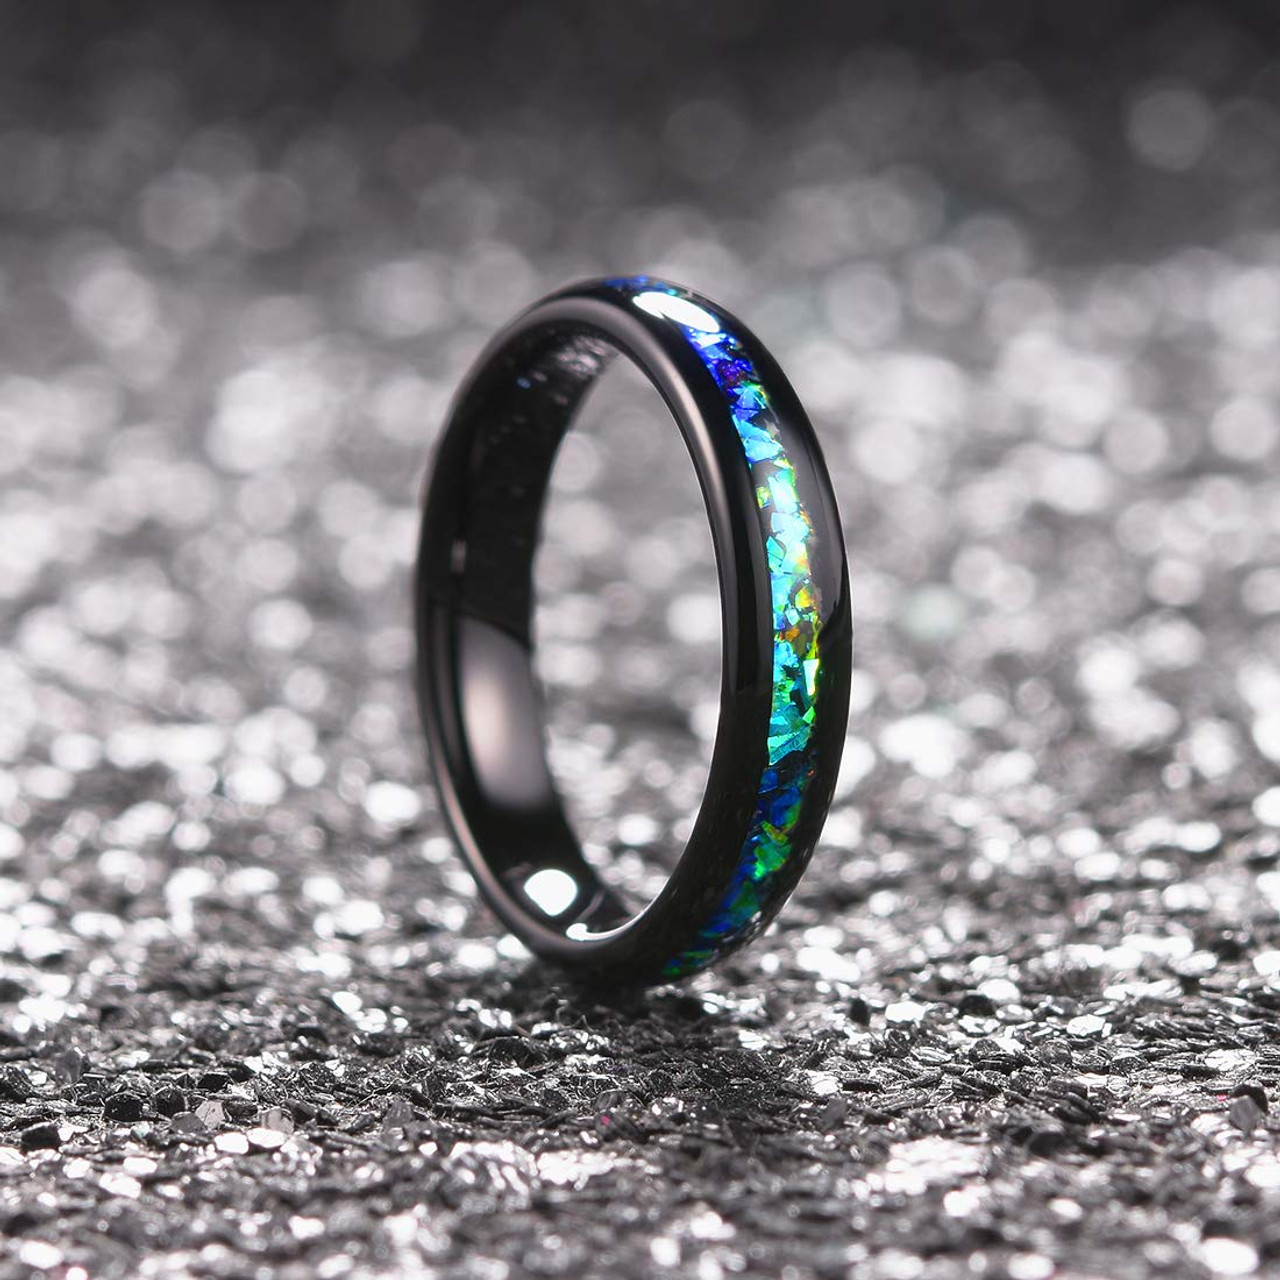 (4mm) Women's Tungsten Carbide Wedding Ring Band - Black Tone with Vibrant Blue and Green Inlay Ring. 